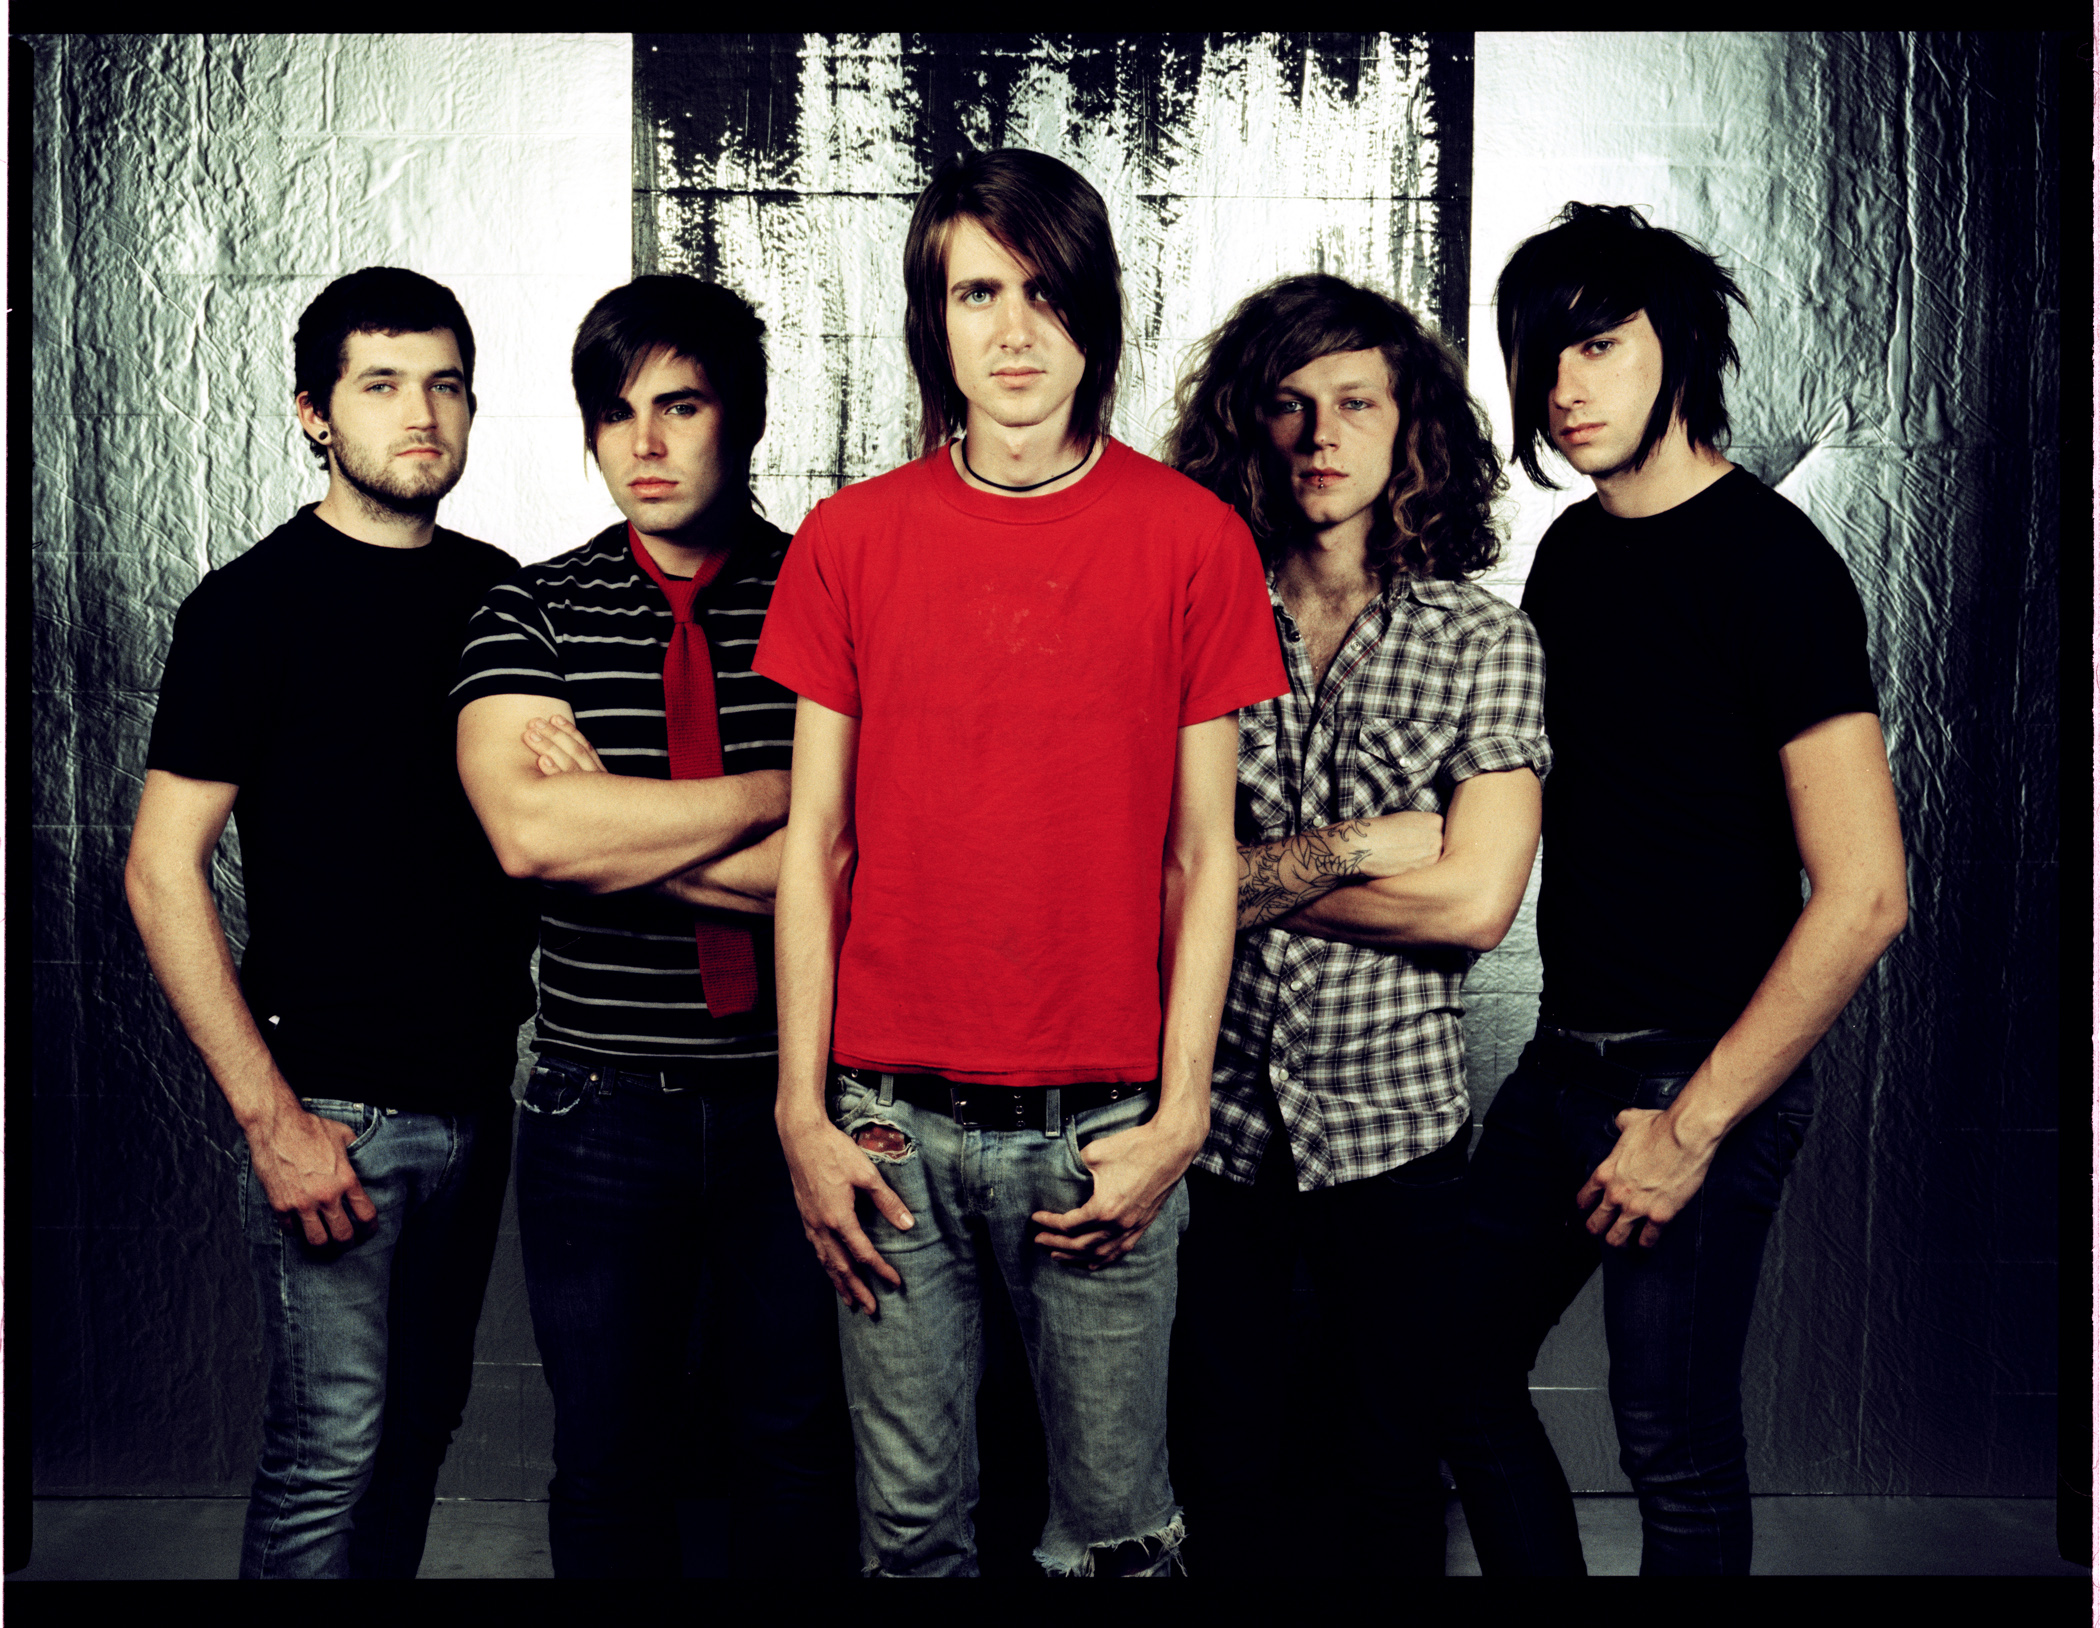 Mayday Parade Backgrounds, Compatible - PC, Mobile, Gadgets| 2100x1628 px